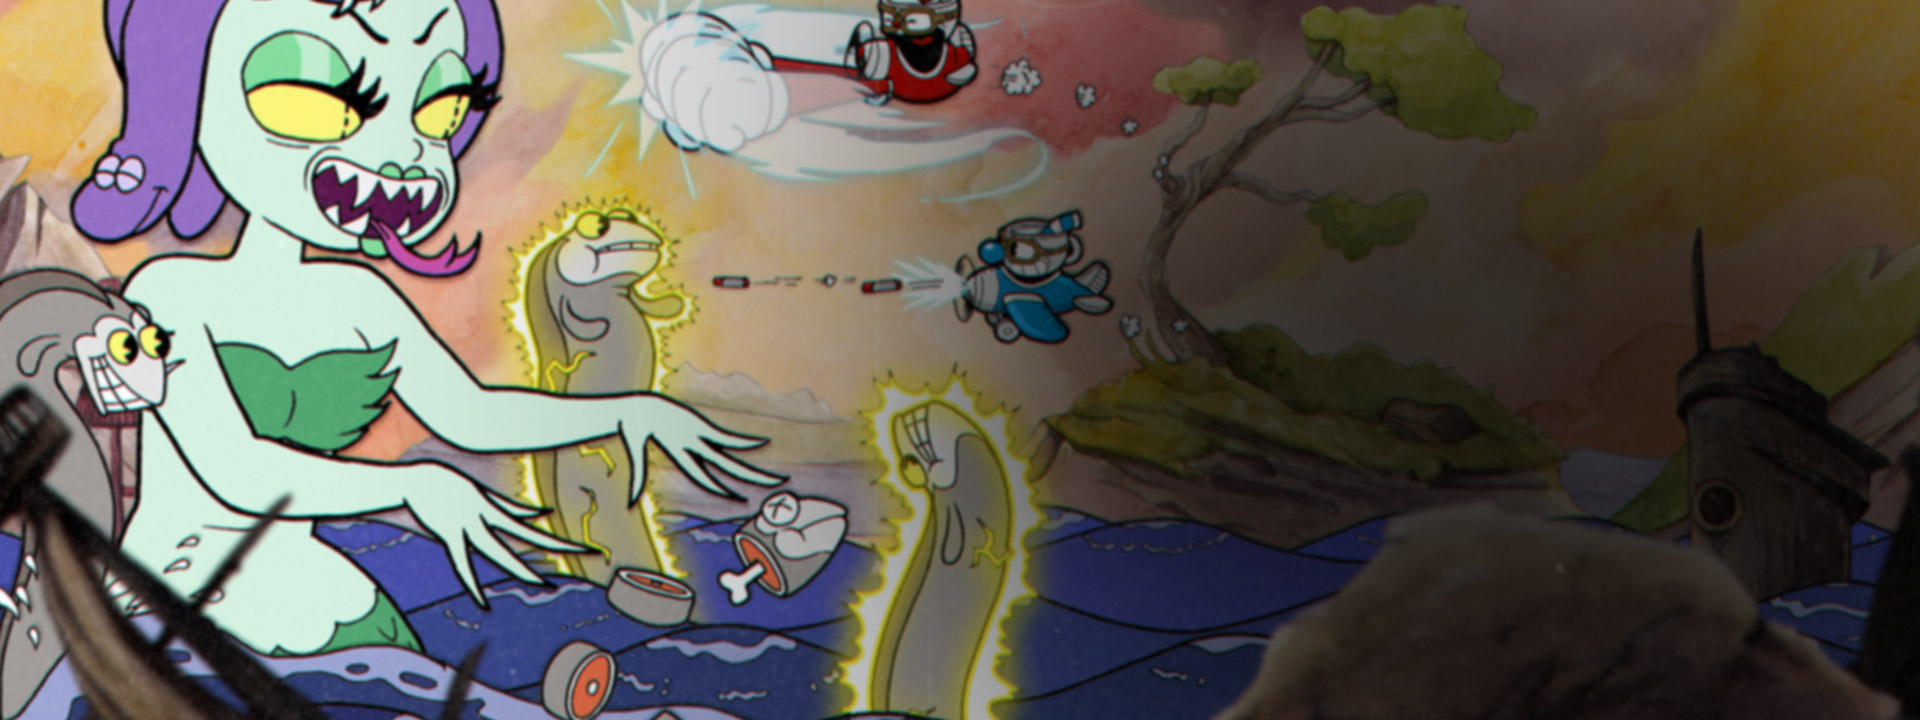 Cuphead and Mugman ride in airplanes and fire at the Mermaid Cala Maria attacking them with eels